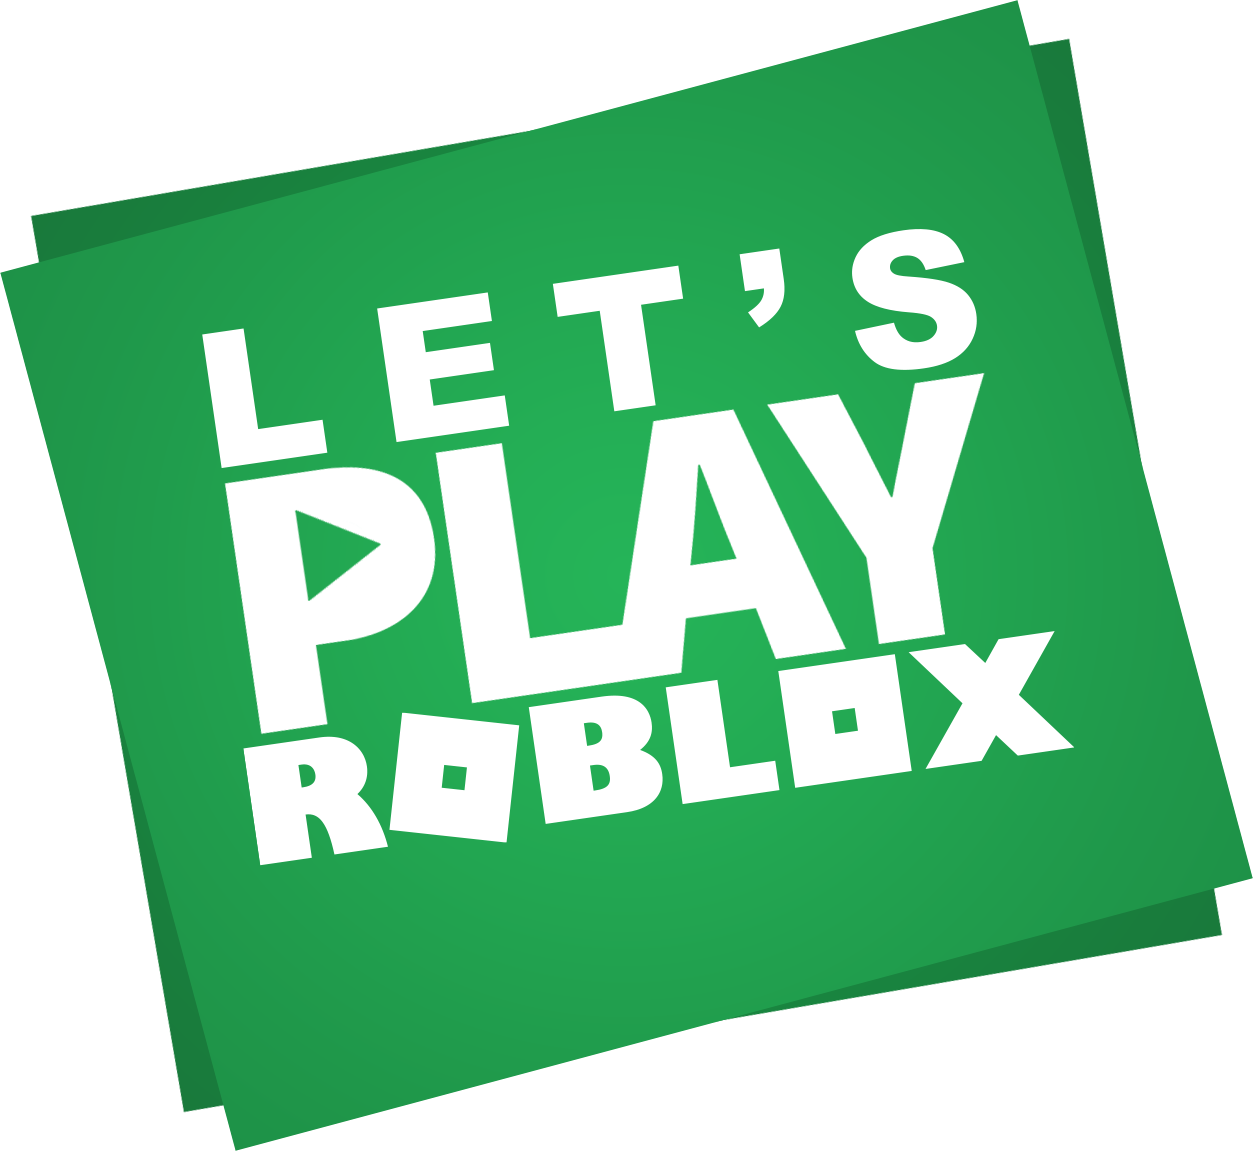 What Is Roblox S Rblx Stock Forecast In 2025 - roblox price target 2025